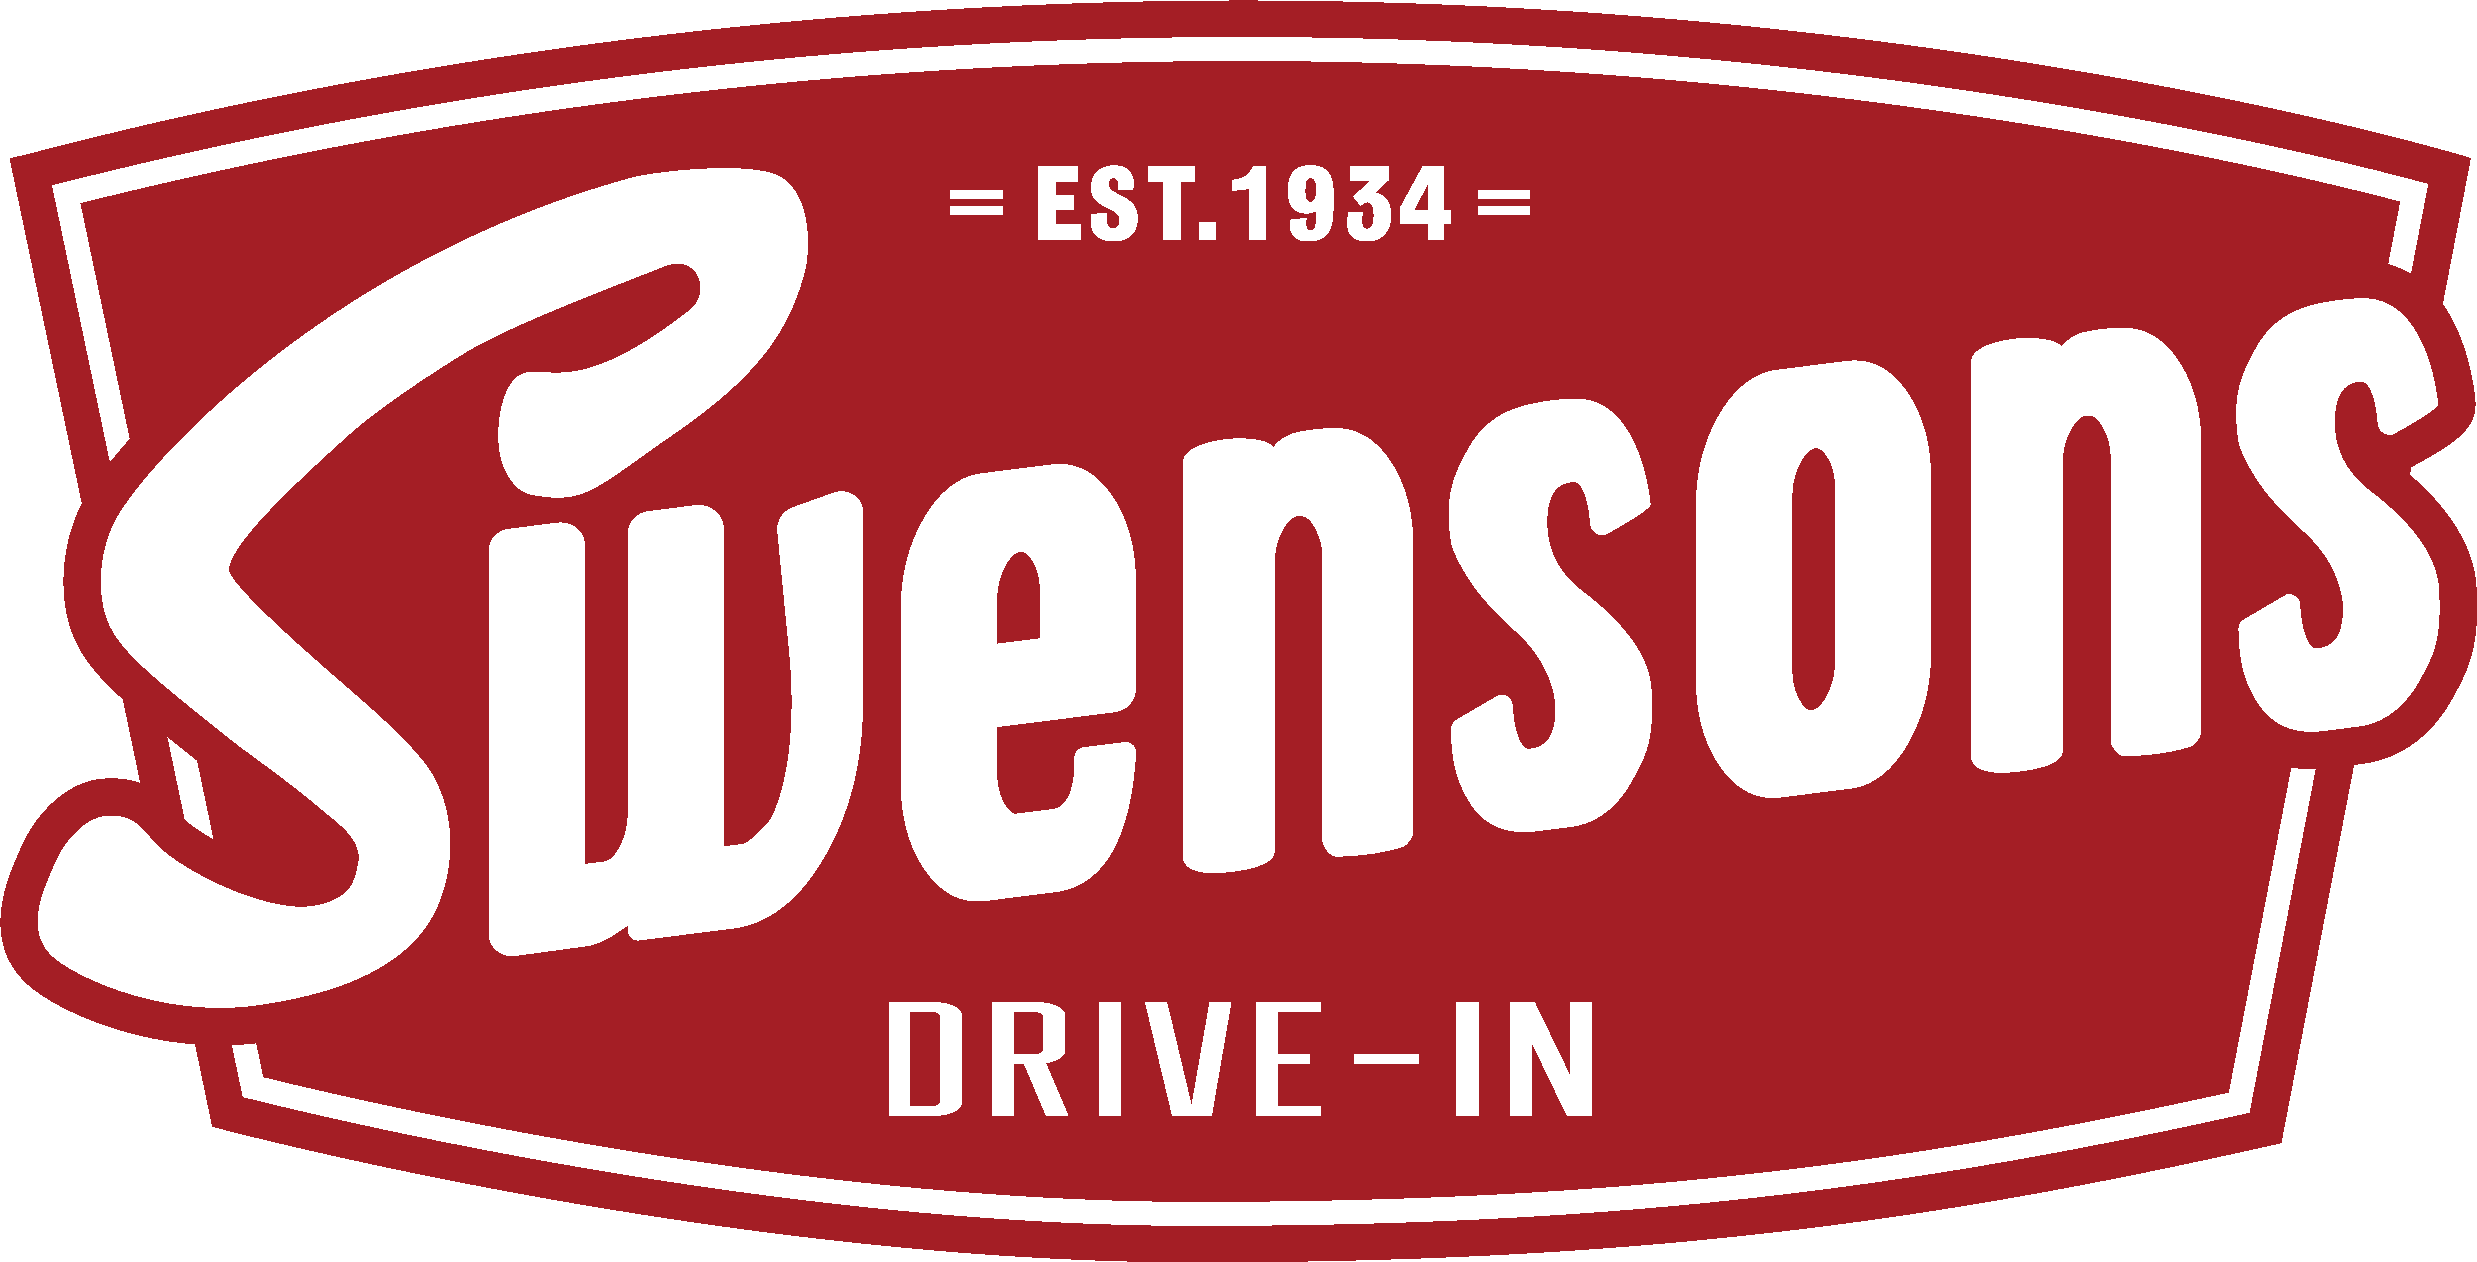 Swensons Drive-In, Home Of The Galley Boy®, "Americas Best Cheeseburger" | Burgers, Sandwiches, Milkshakes & more. | Best Cheeseburger